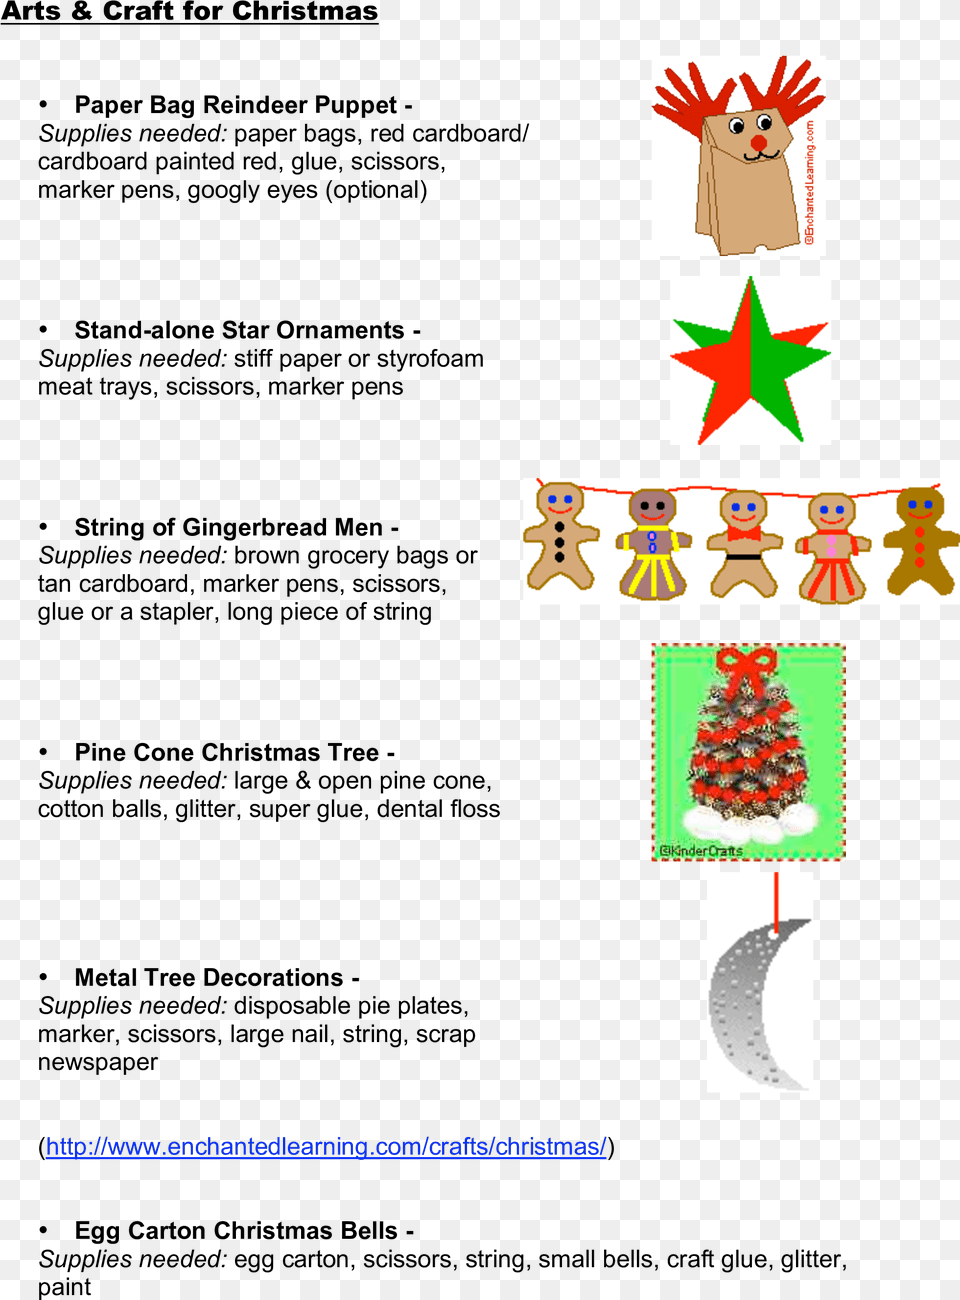 Download Christmas Tree Craft Main Image Easy Christmas Easy Christmas Crafts For Kids, Person, Baby Free Transparent Png